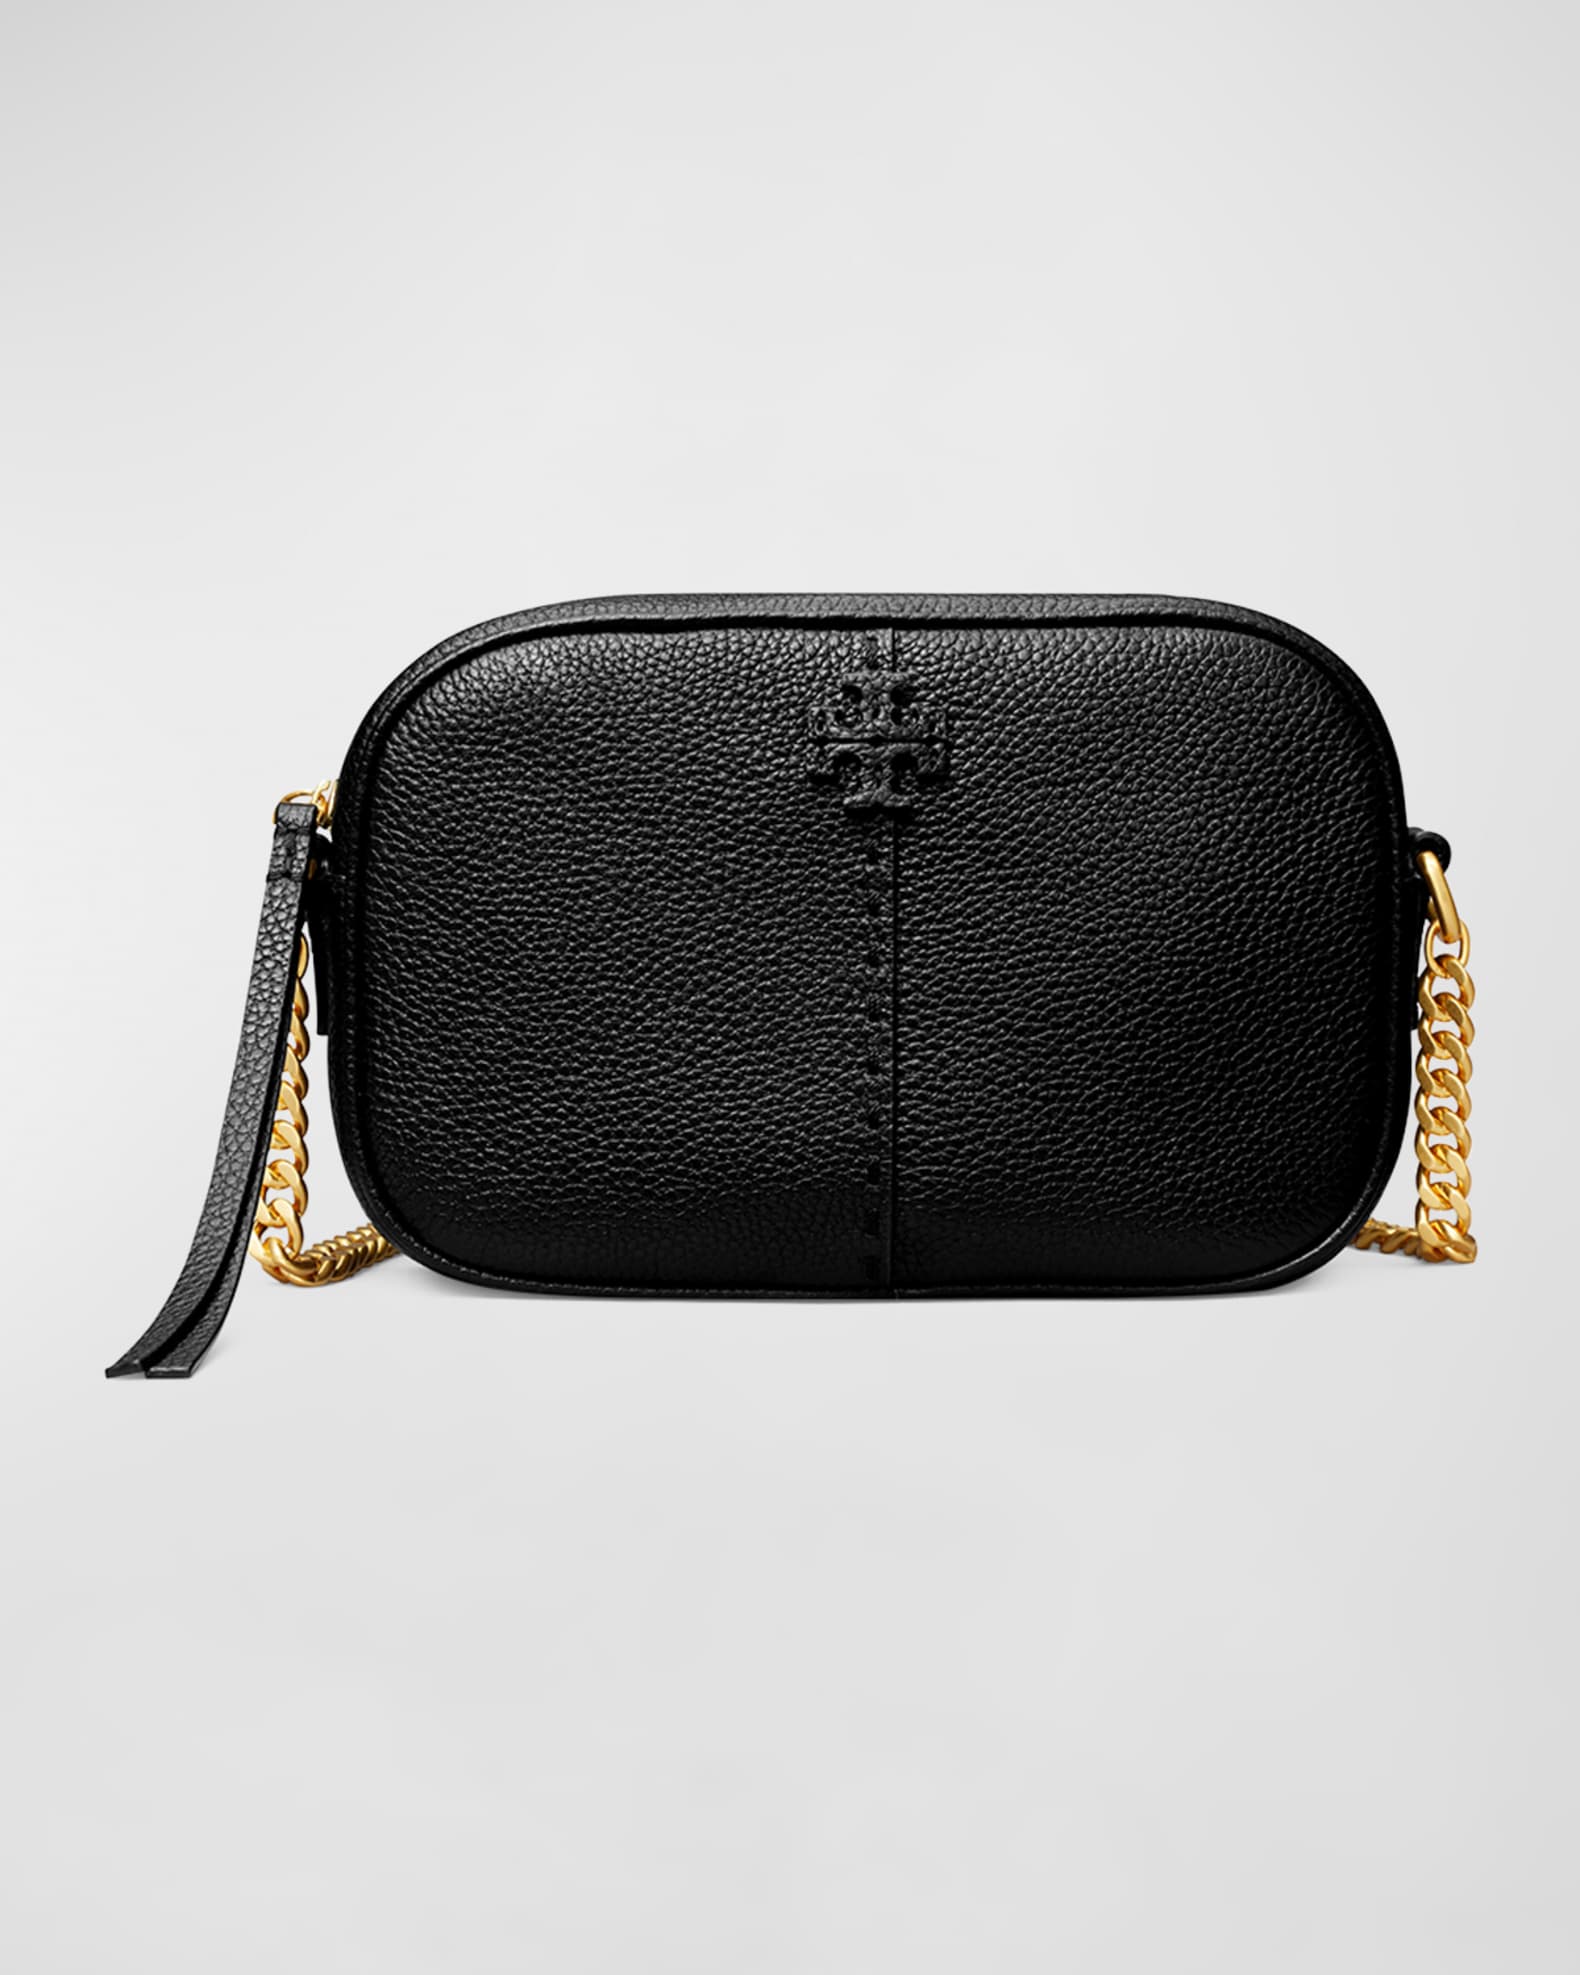  Tory Burch Women's Mcgraw Camera Bag, Black, One Size :  Clothing, Shoes & Jewelry